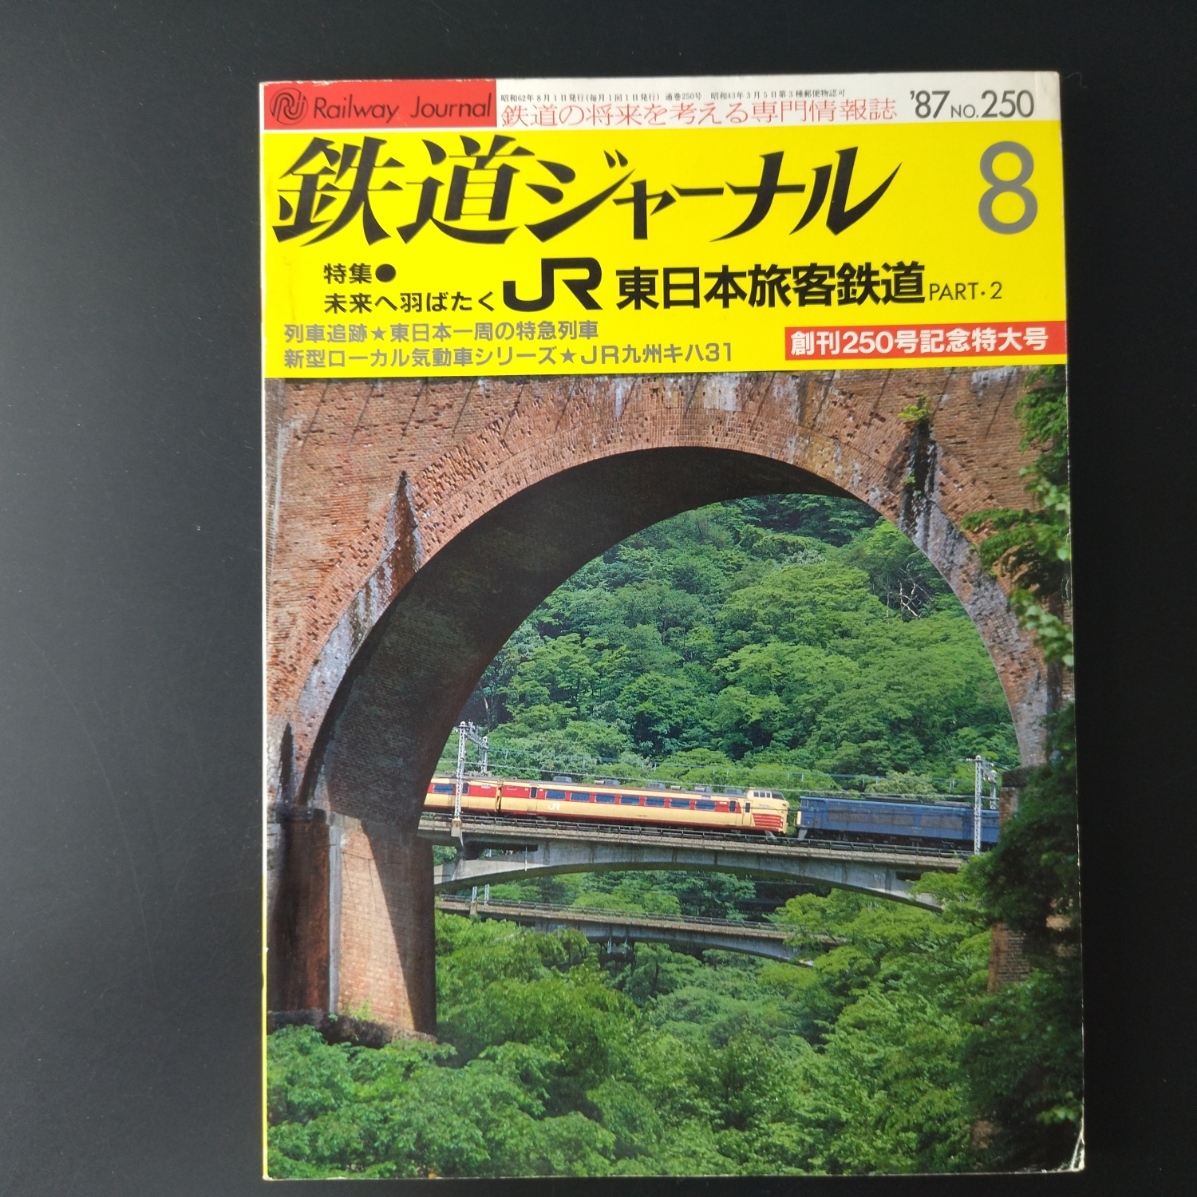 1987 year issue *..250 number memory extra-large number [ Railway Journal ] special collection * future . feather ...JR East Japan . customer railroad *Part2.... other 